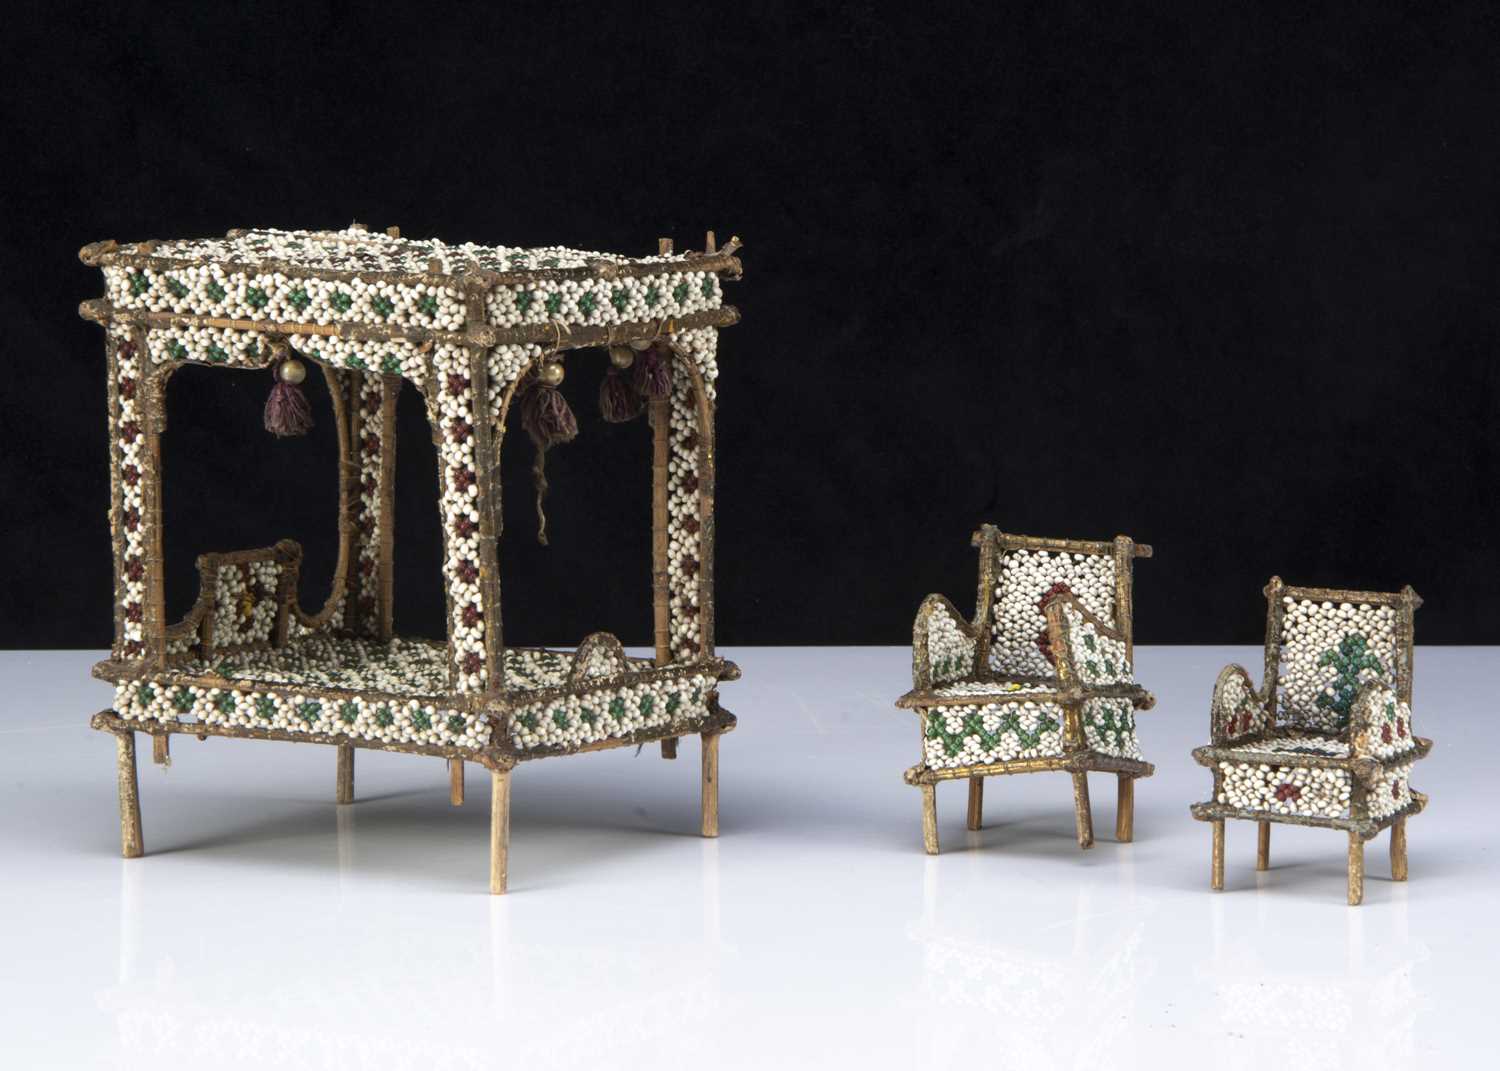 Lot 8 - An unusual glass bead and twig dolls’ house four-poster bed